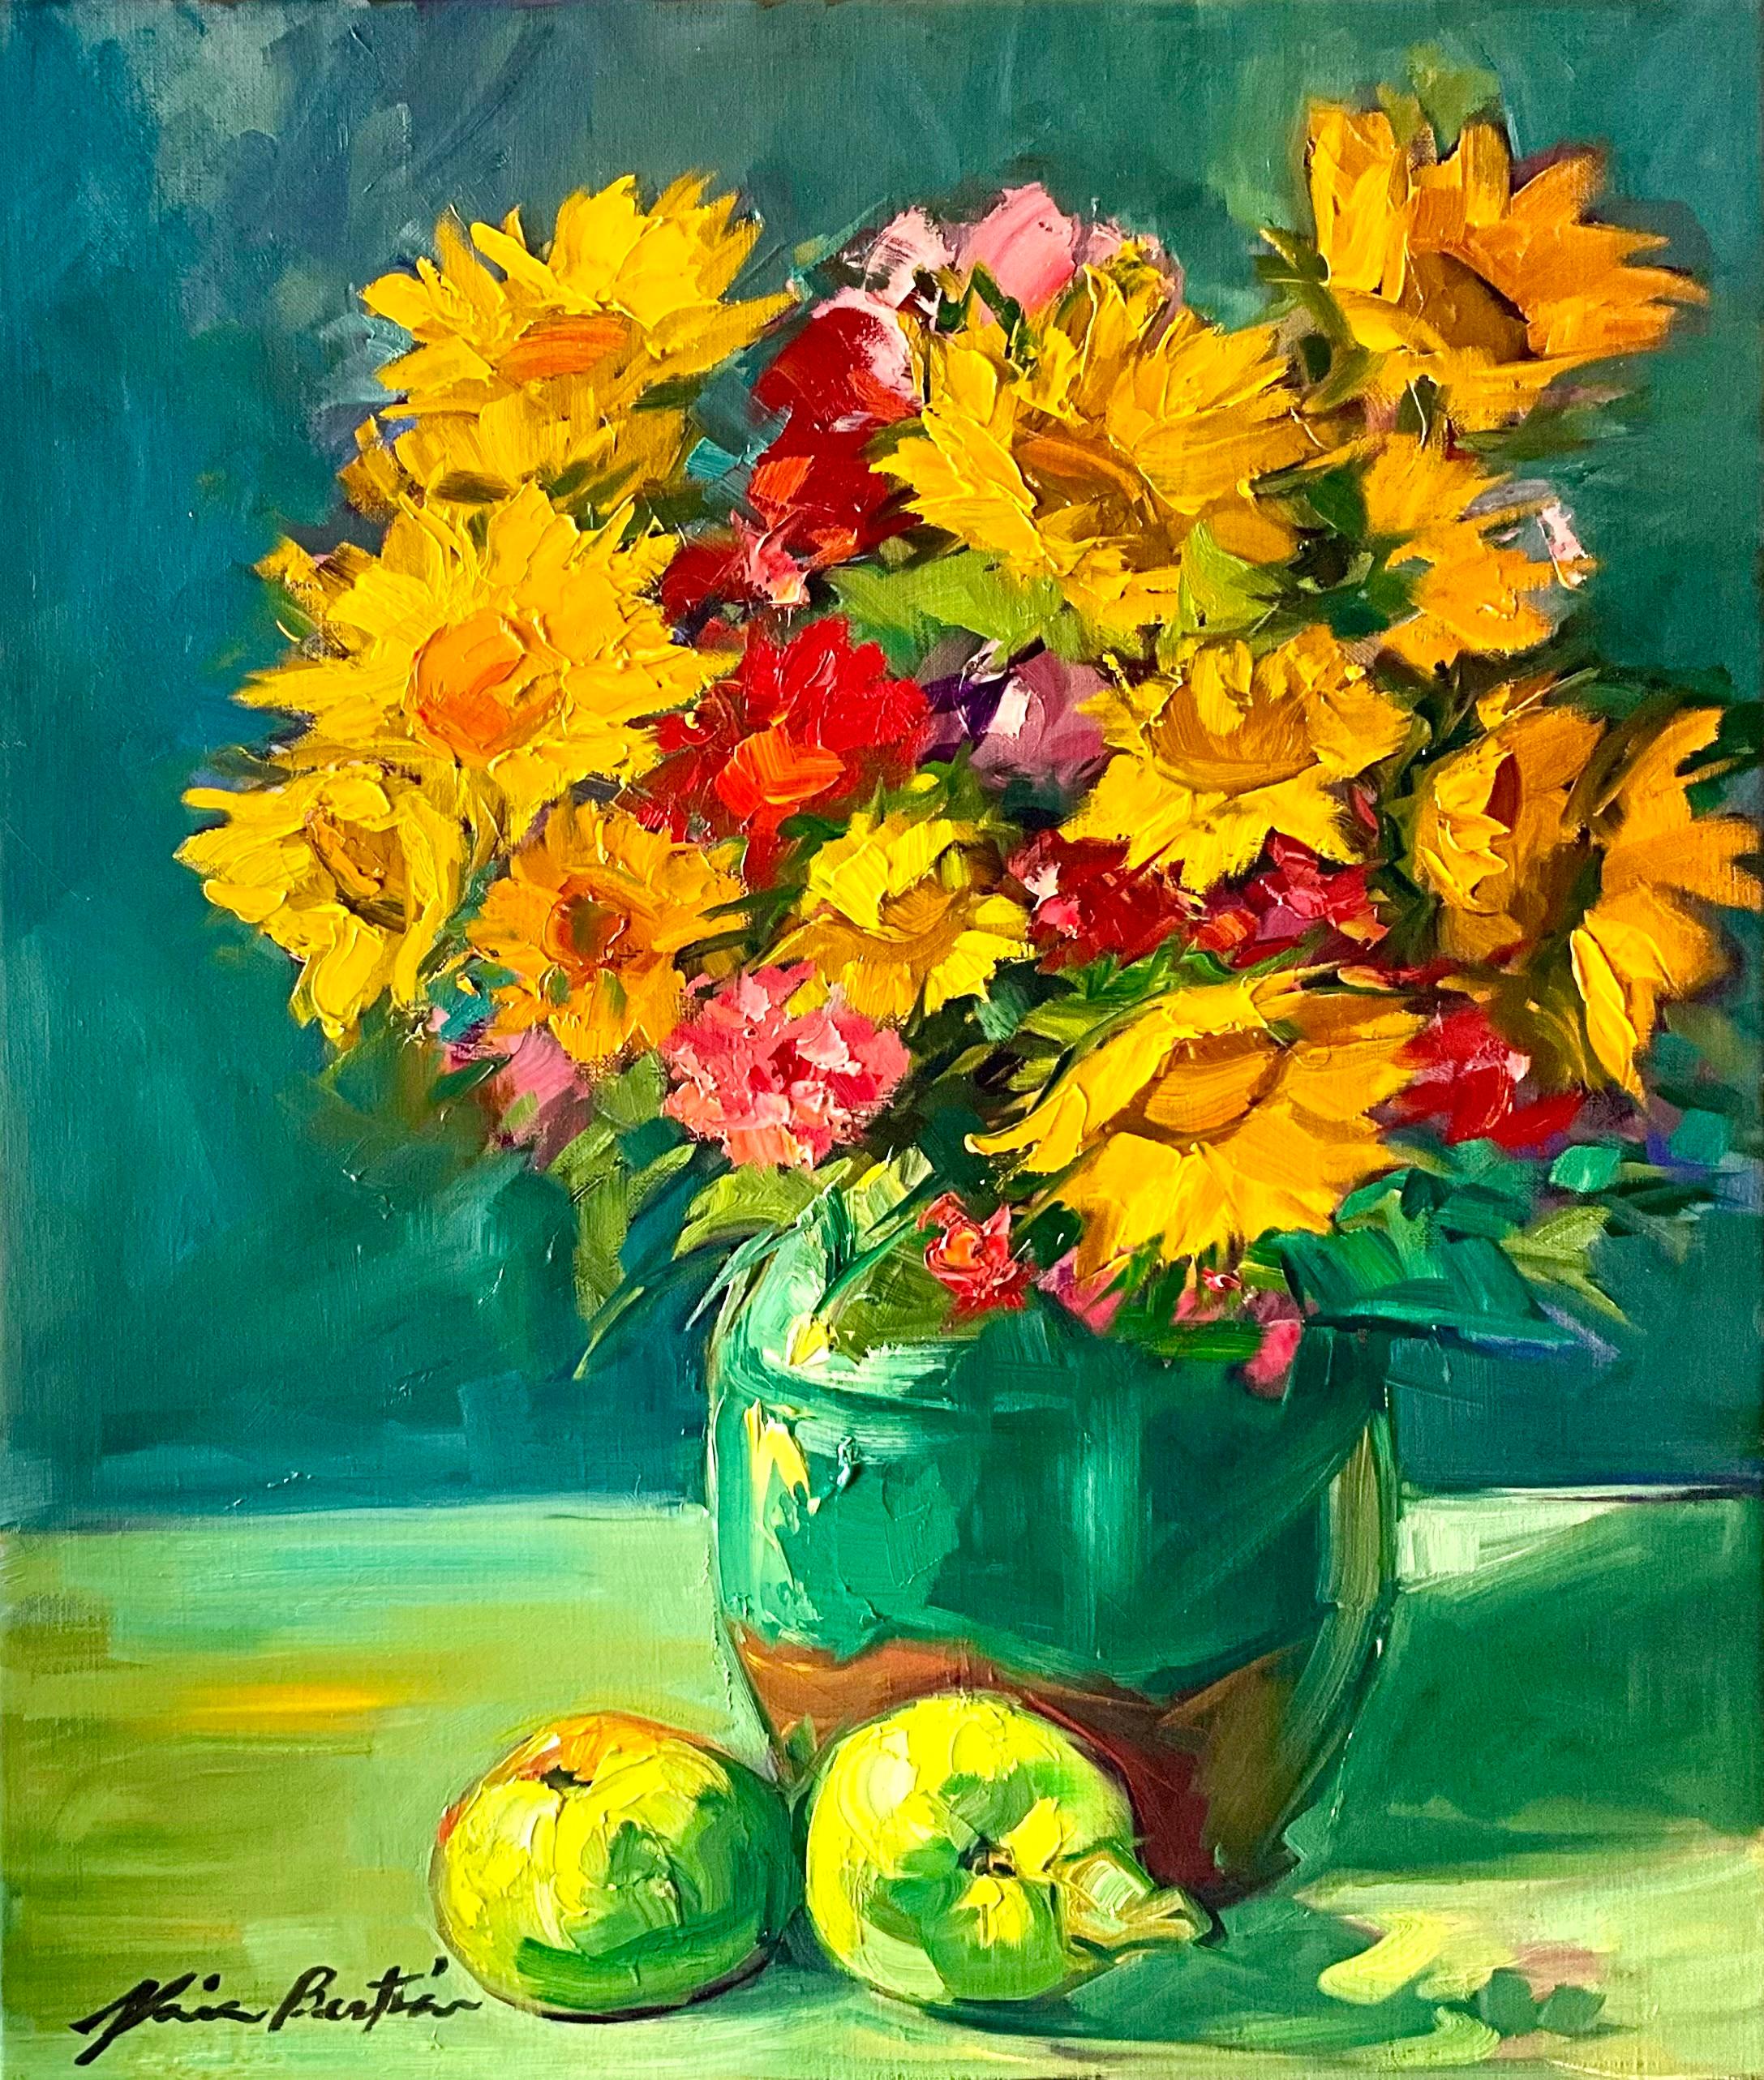 Maria Bertrán Still-Life Painting - "Sunflowers In Provencal Vase" Contemporary Impressionist Still Life Oil